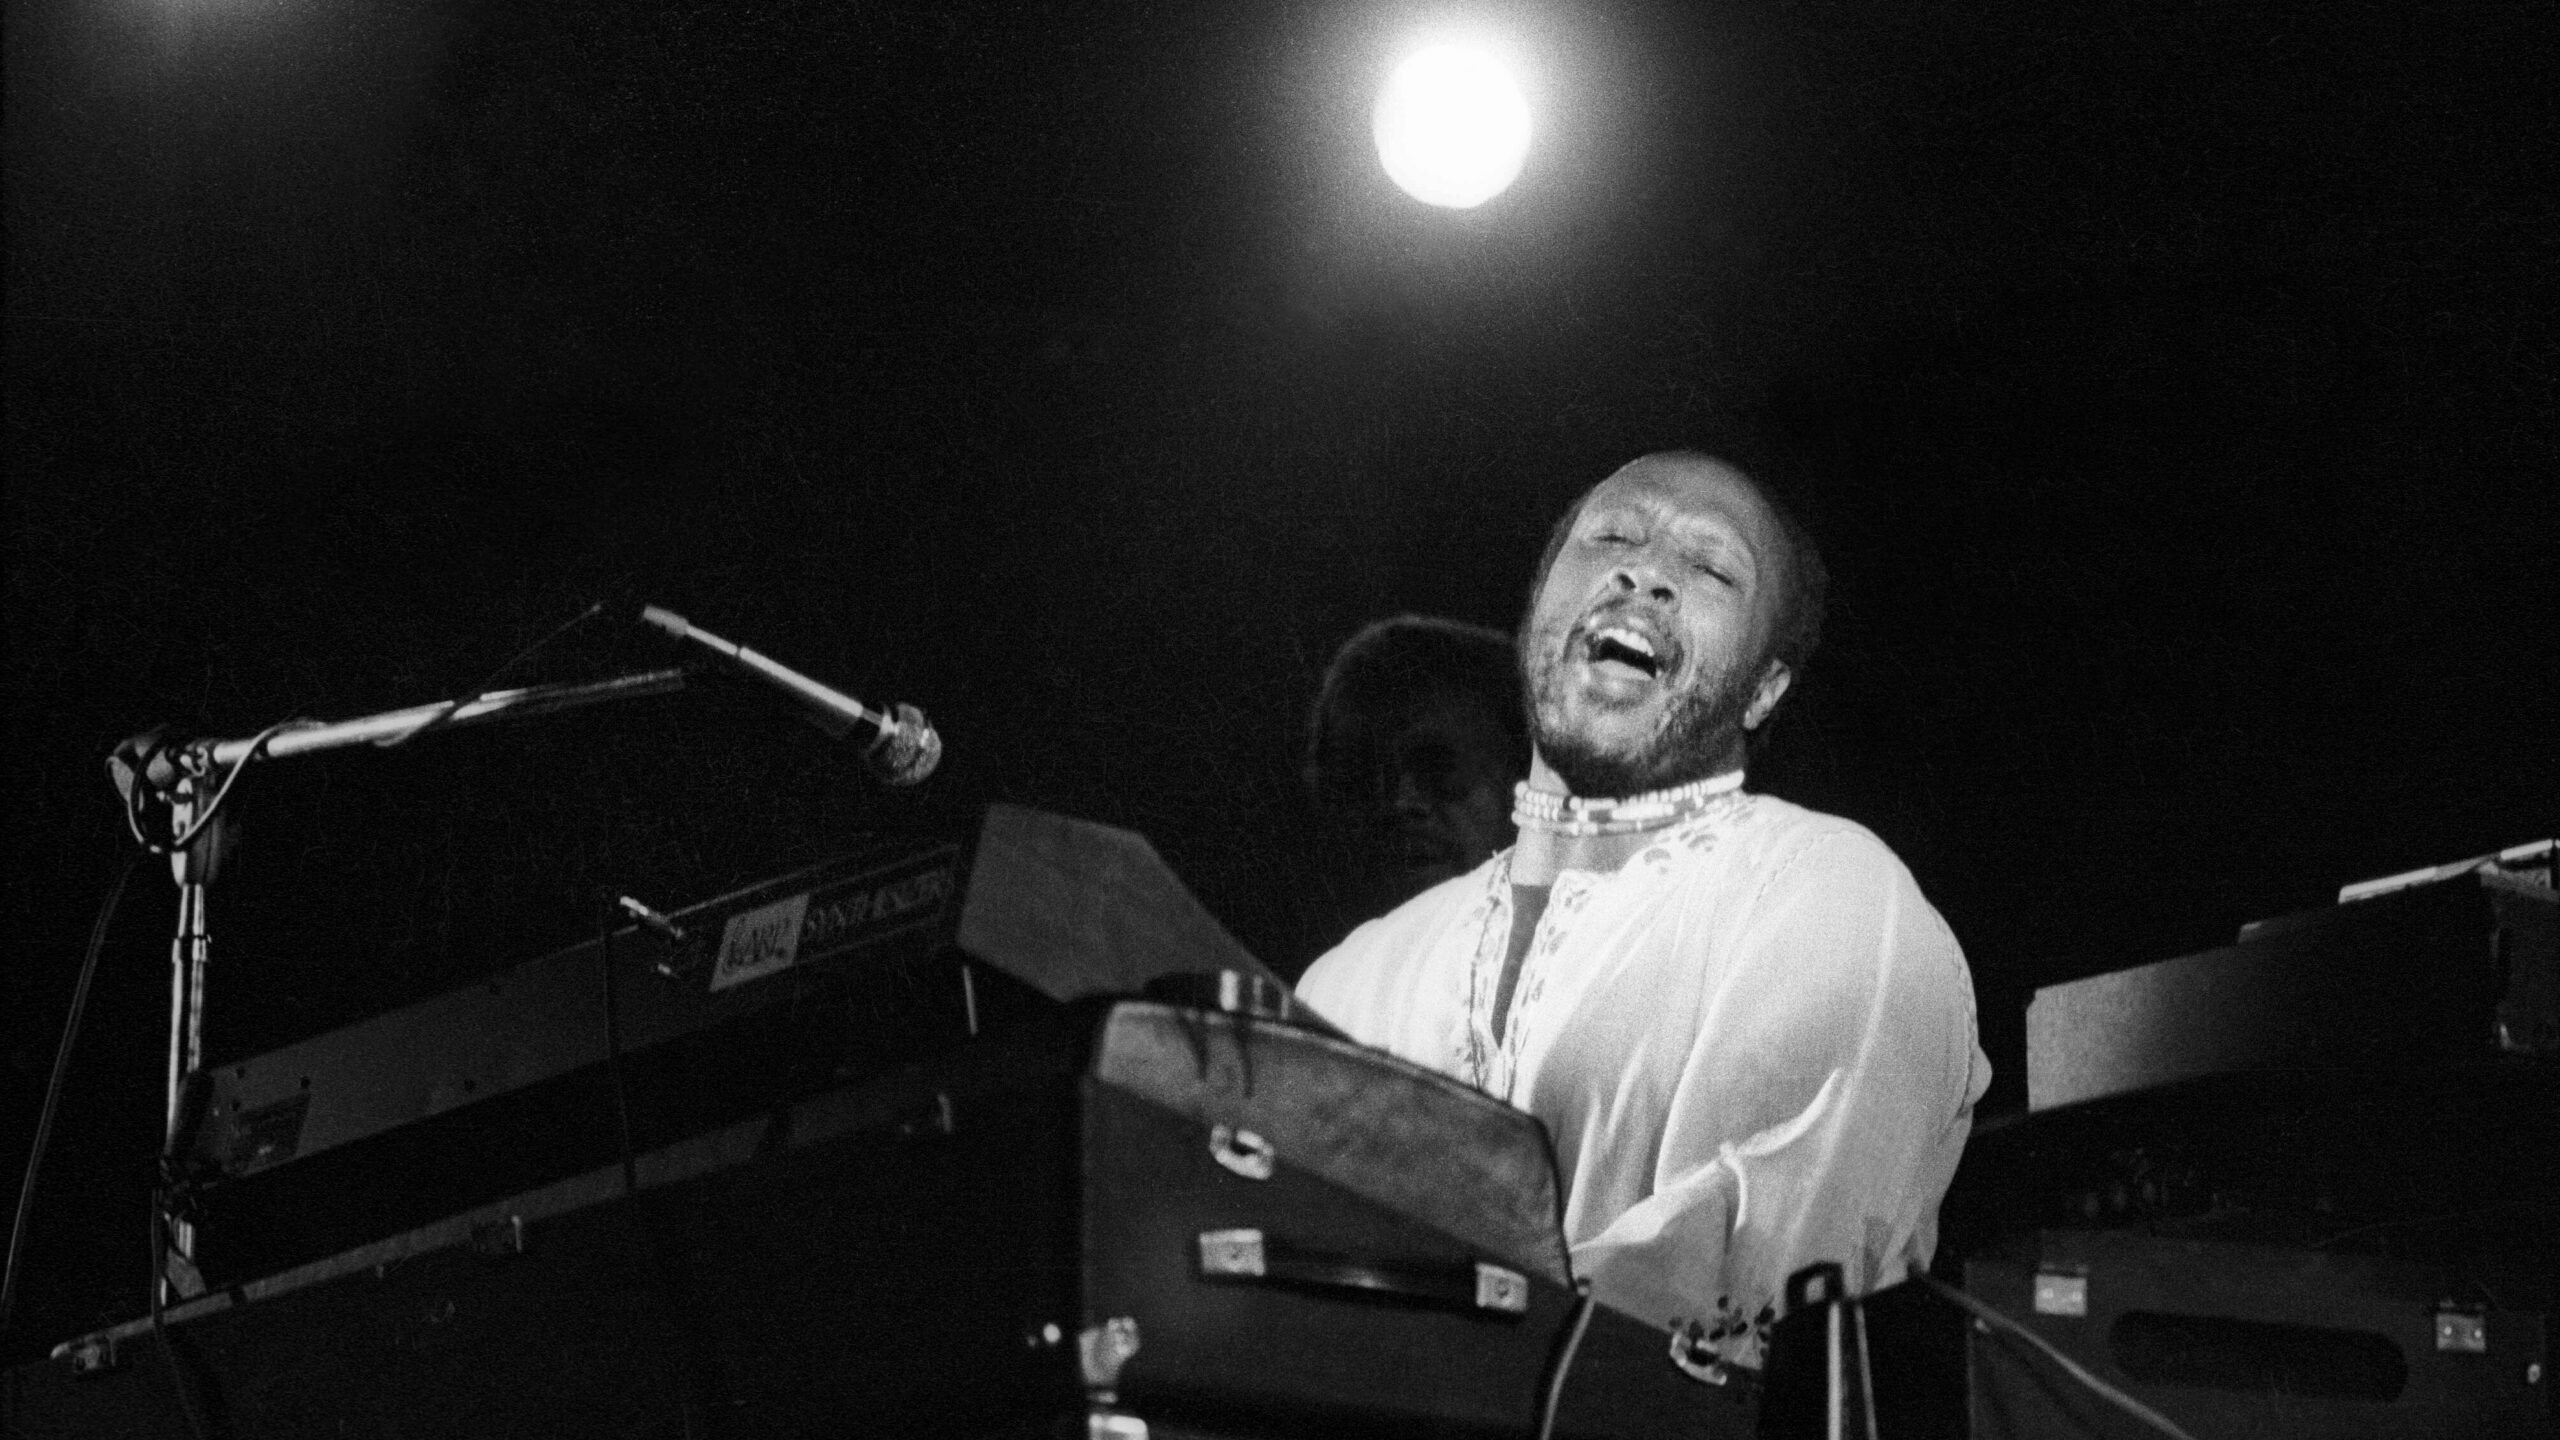 Les McCann performs at the Newport Jazz Festival in 1974.